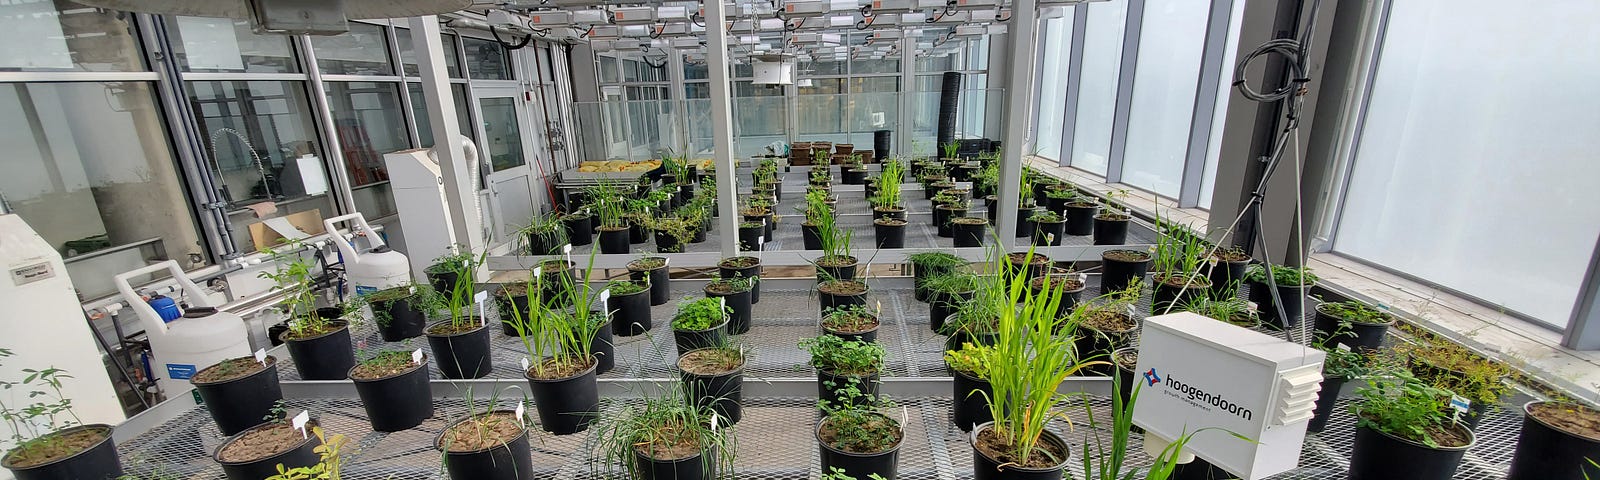 A variety of potted plants are laid out in rows atop a metal grate in a greenhouse.